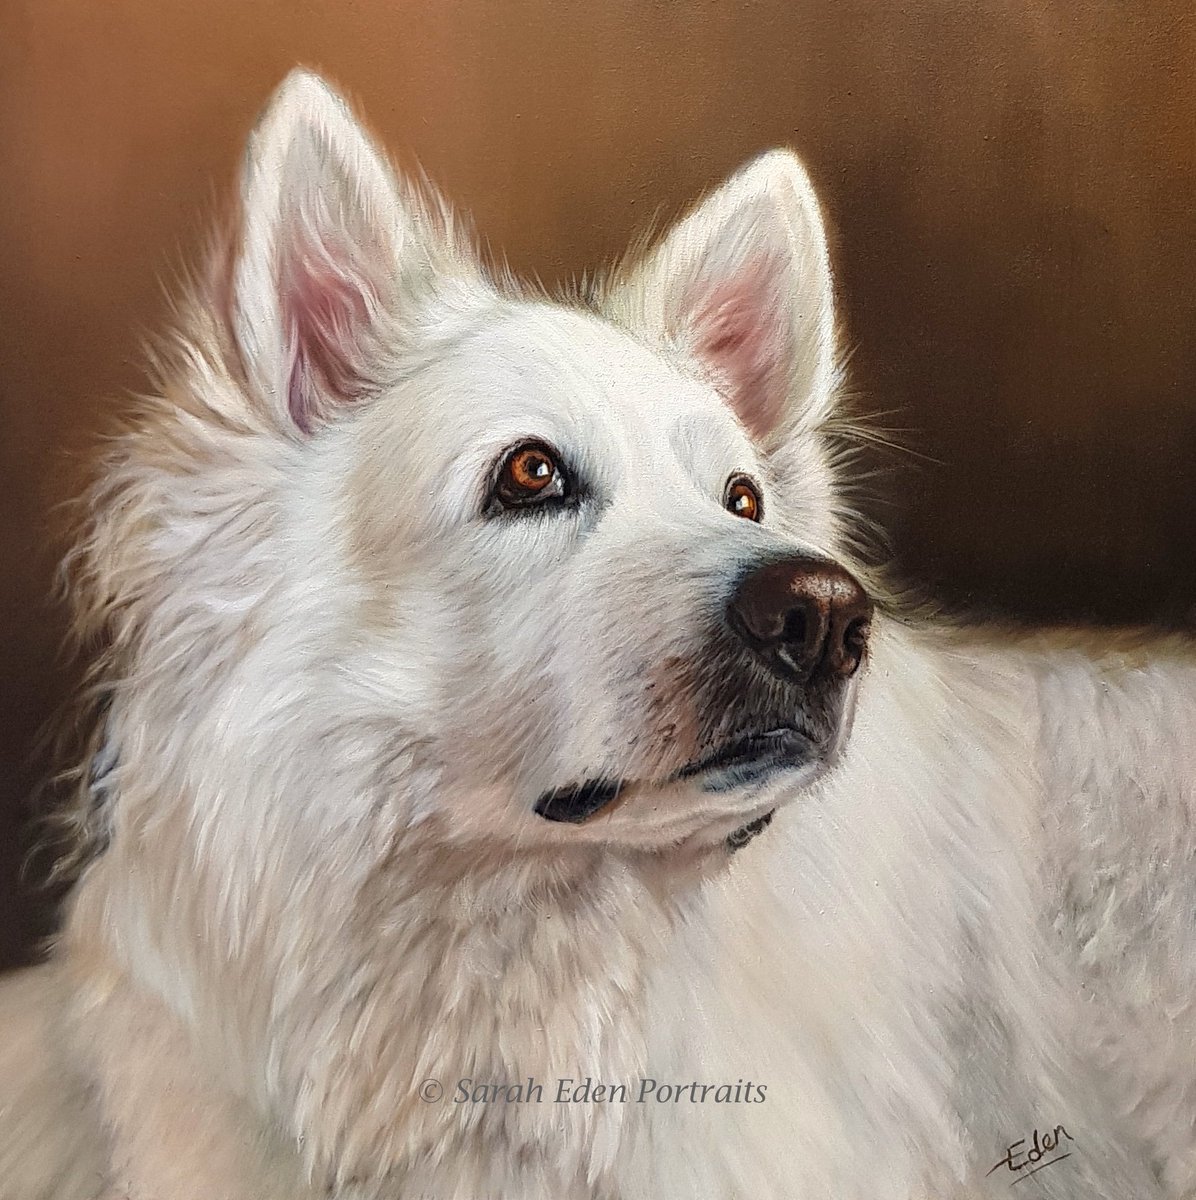 Lexie is finished! I've reworked her little to really emphasise her whiteness. Oil on board, 12 x 12'. Would love to know your thoughts! :-)
#whitegermanshepherd #gsd #germanshepherd #samoyed